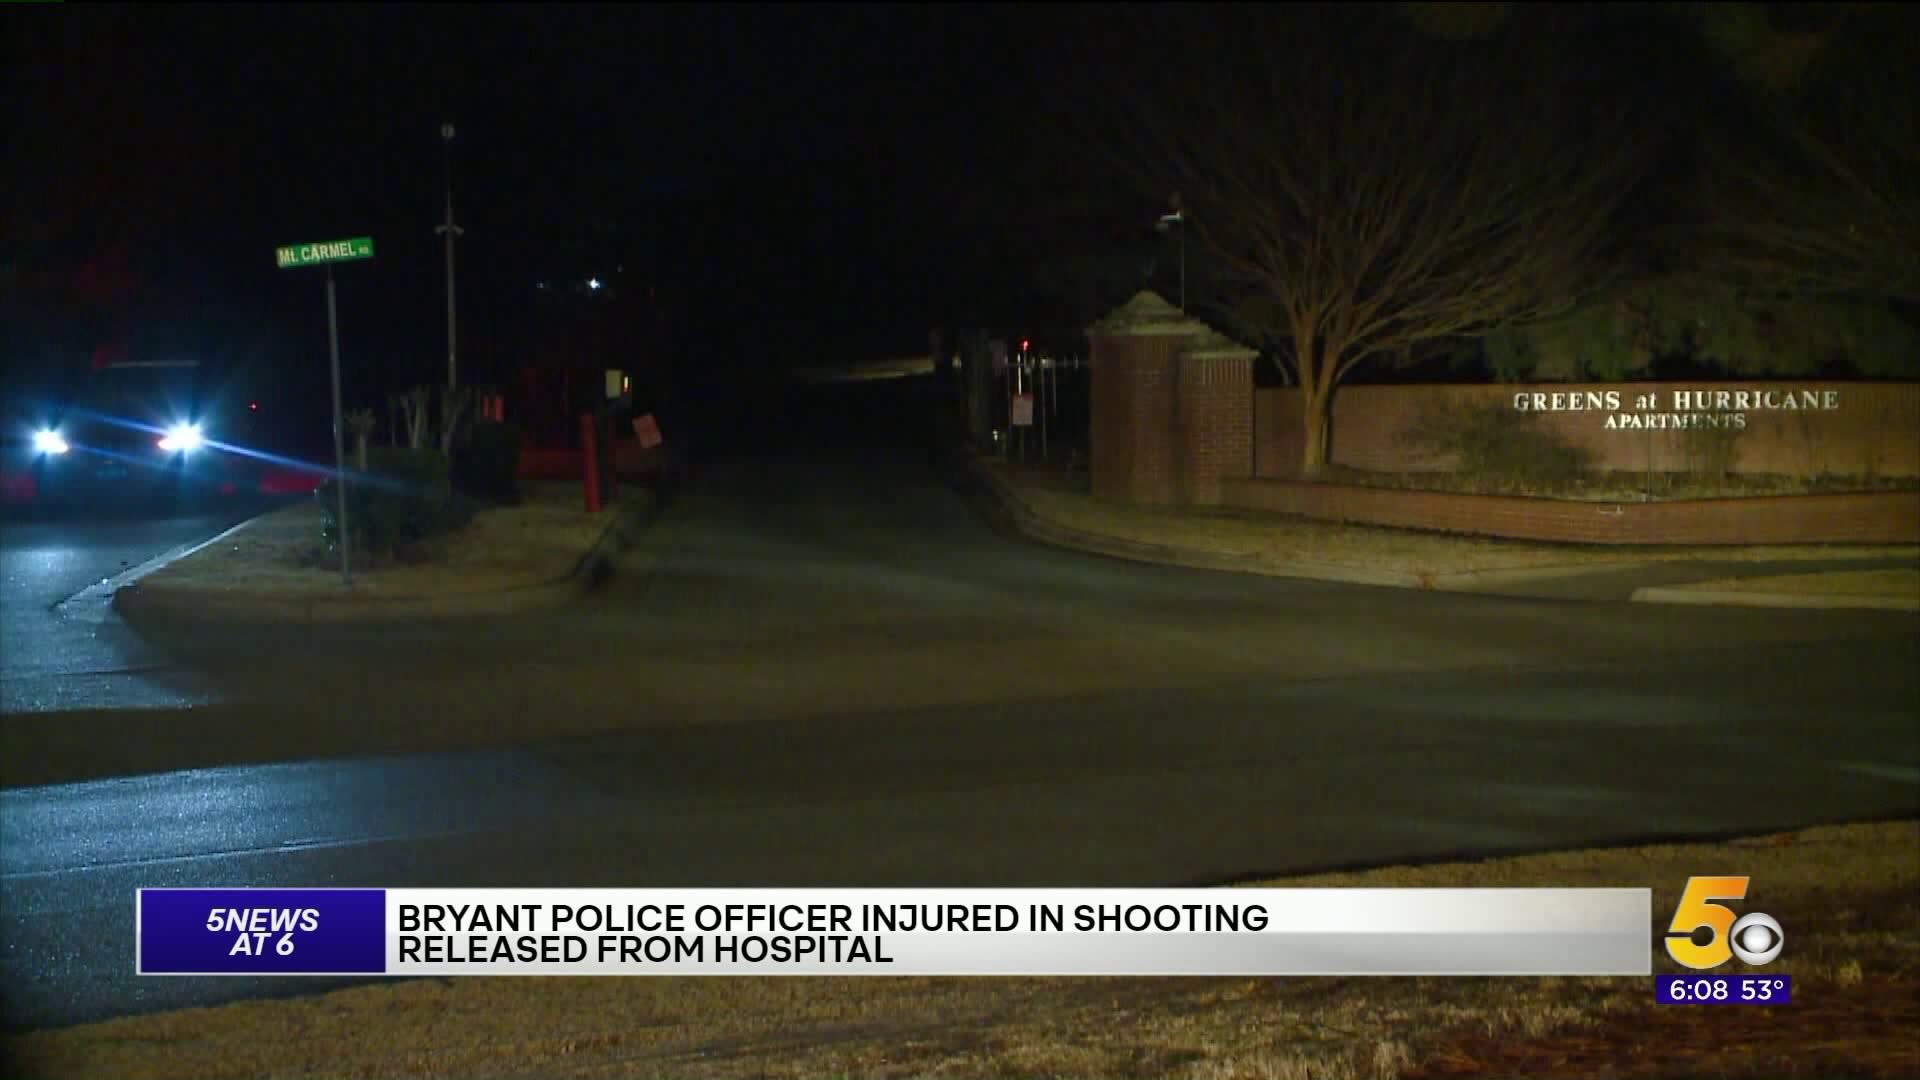 Bryant Police Officer Released From Hospital After Being Shot While Responding To A Call